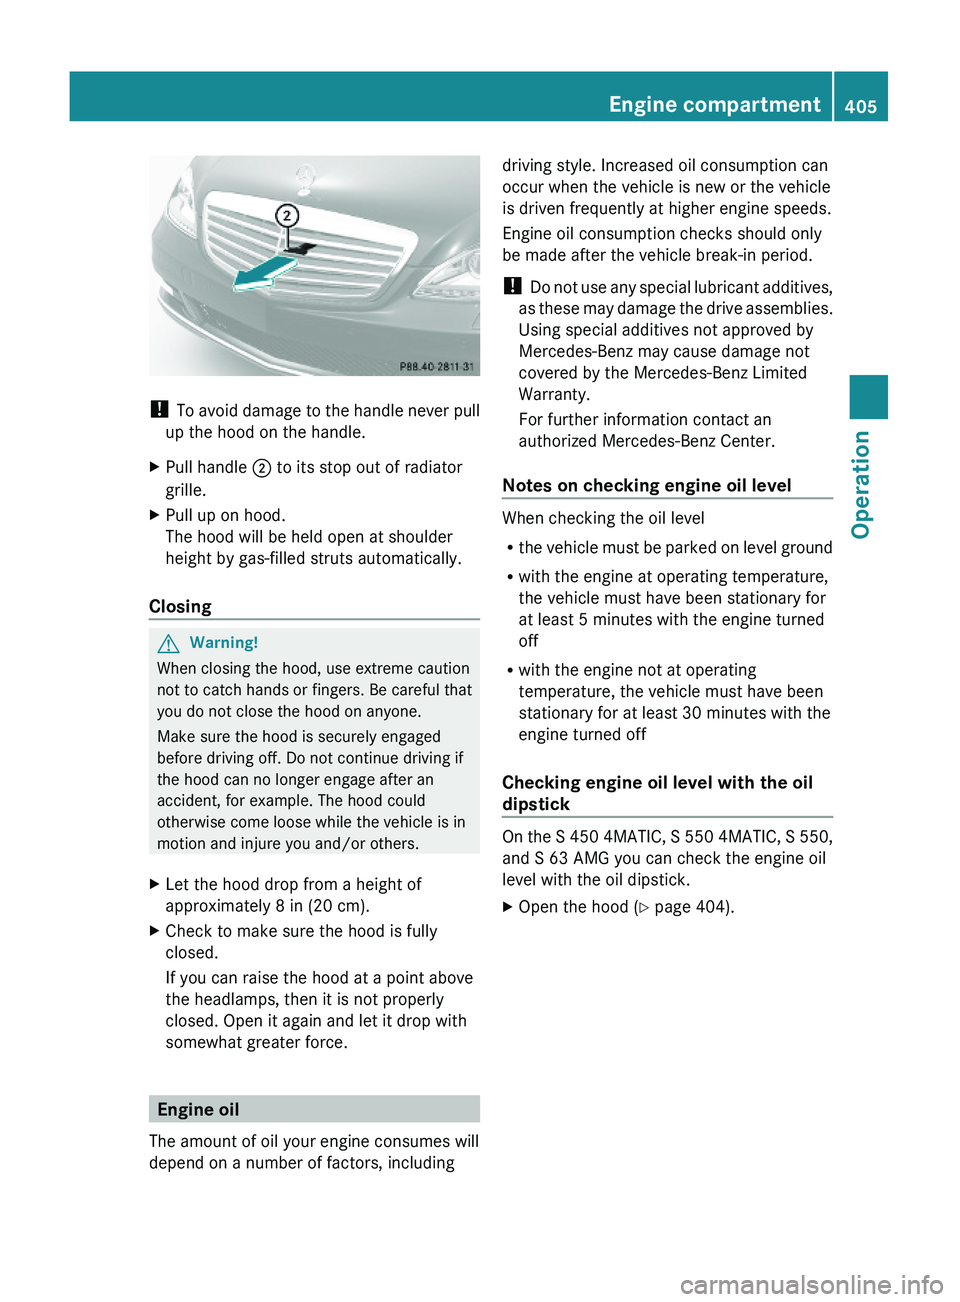 MERCEDES-BENZ S CLASS 2010  Owners Manual ! To avoid damage to the handle never pull
up the hood on the handle.
XPull handle \000G to its stop out of radiator
grille.
XPull up on hood.
The hood will be held open at shoulder
height by gas-fill